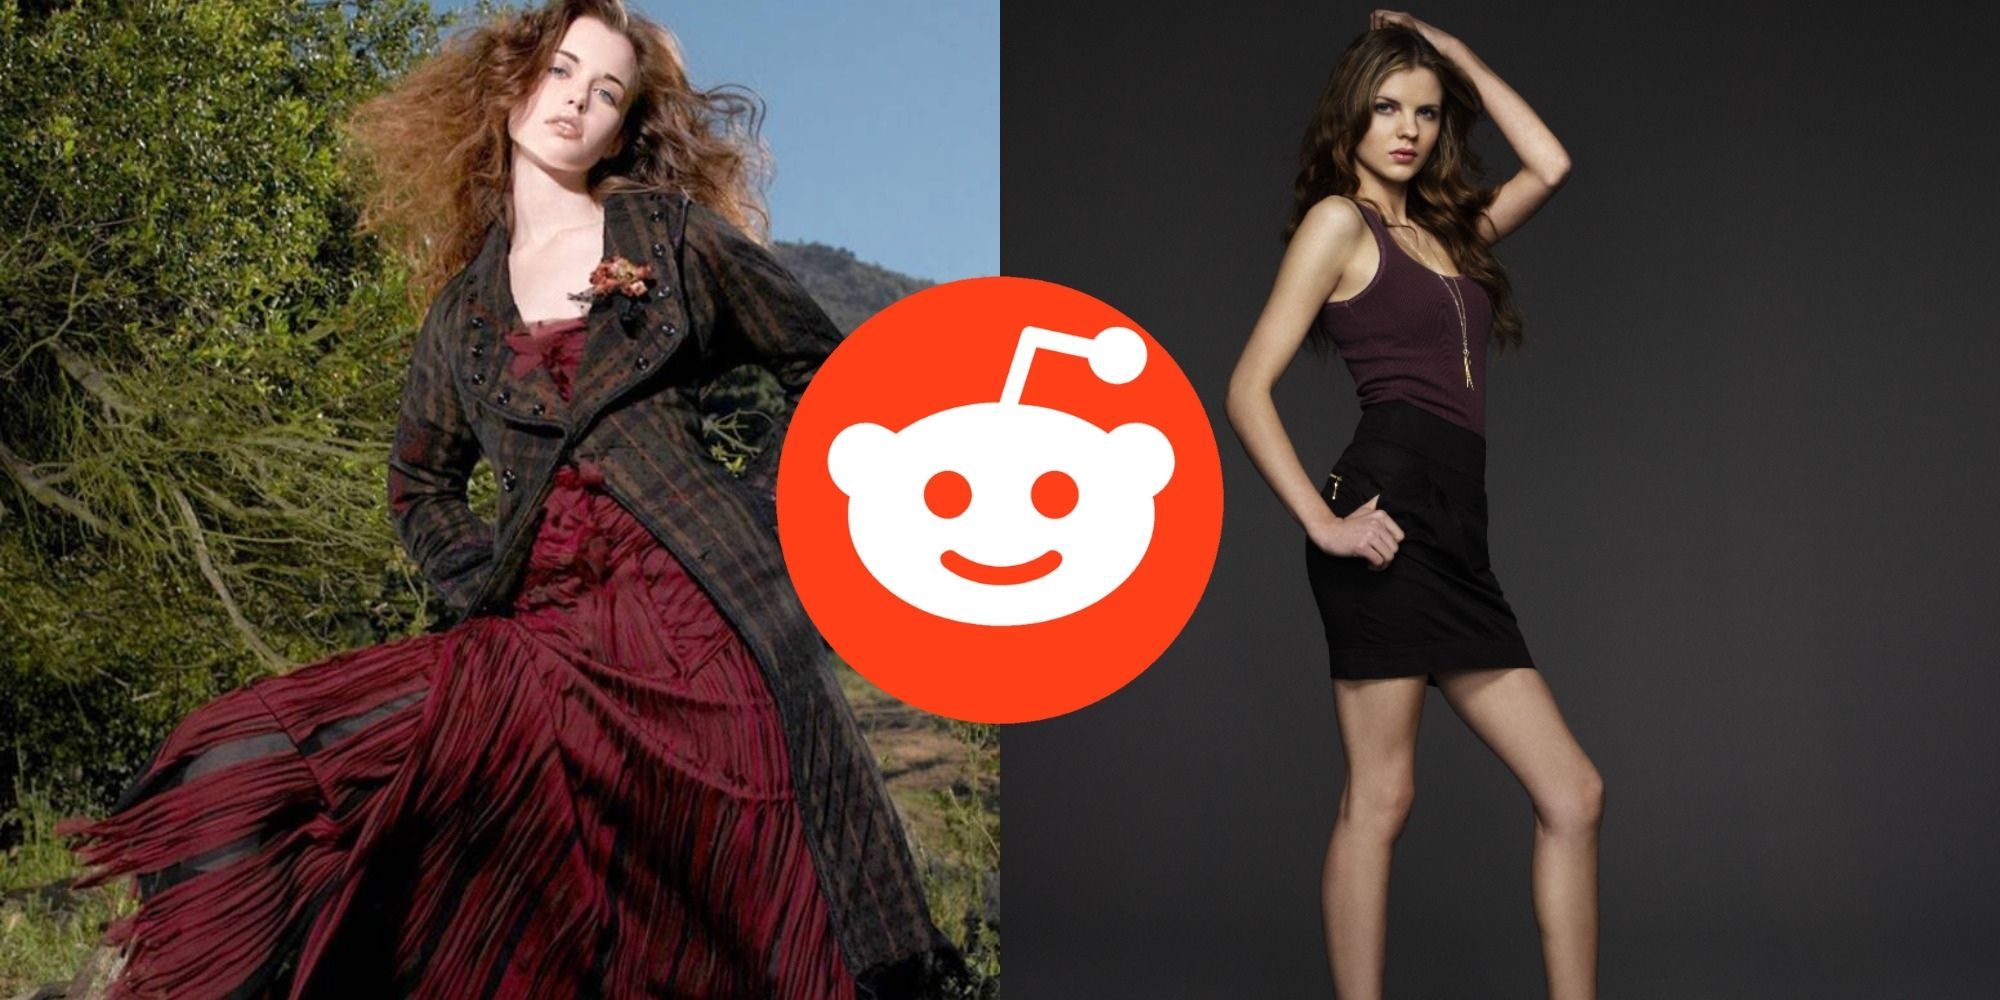 Split image showing Nicole and Katarzyna in ANTM, and the Reddit logo